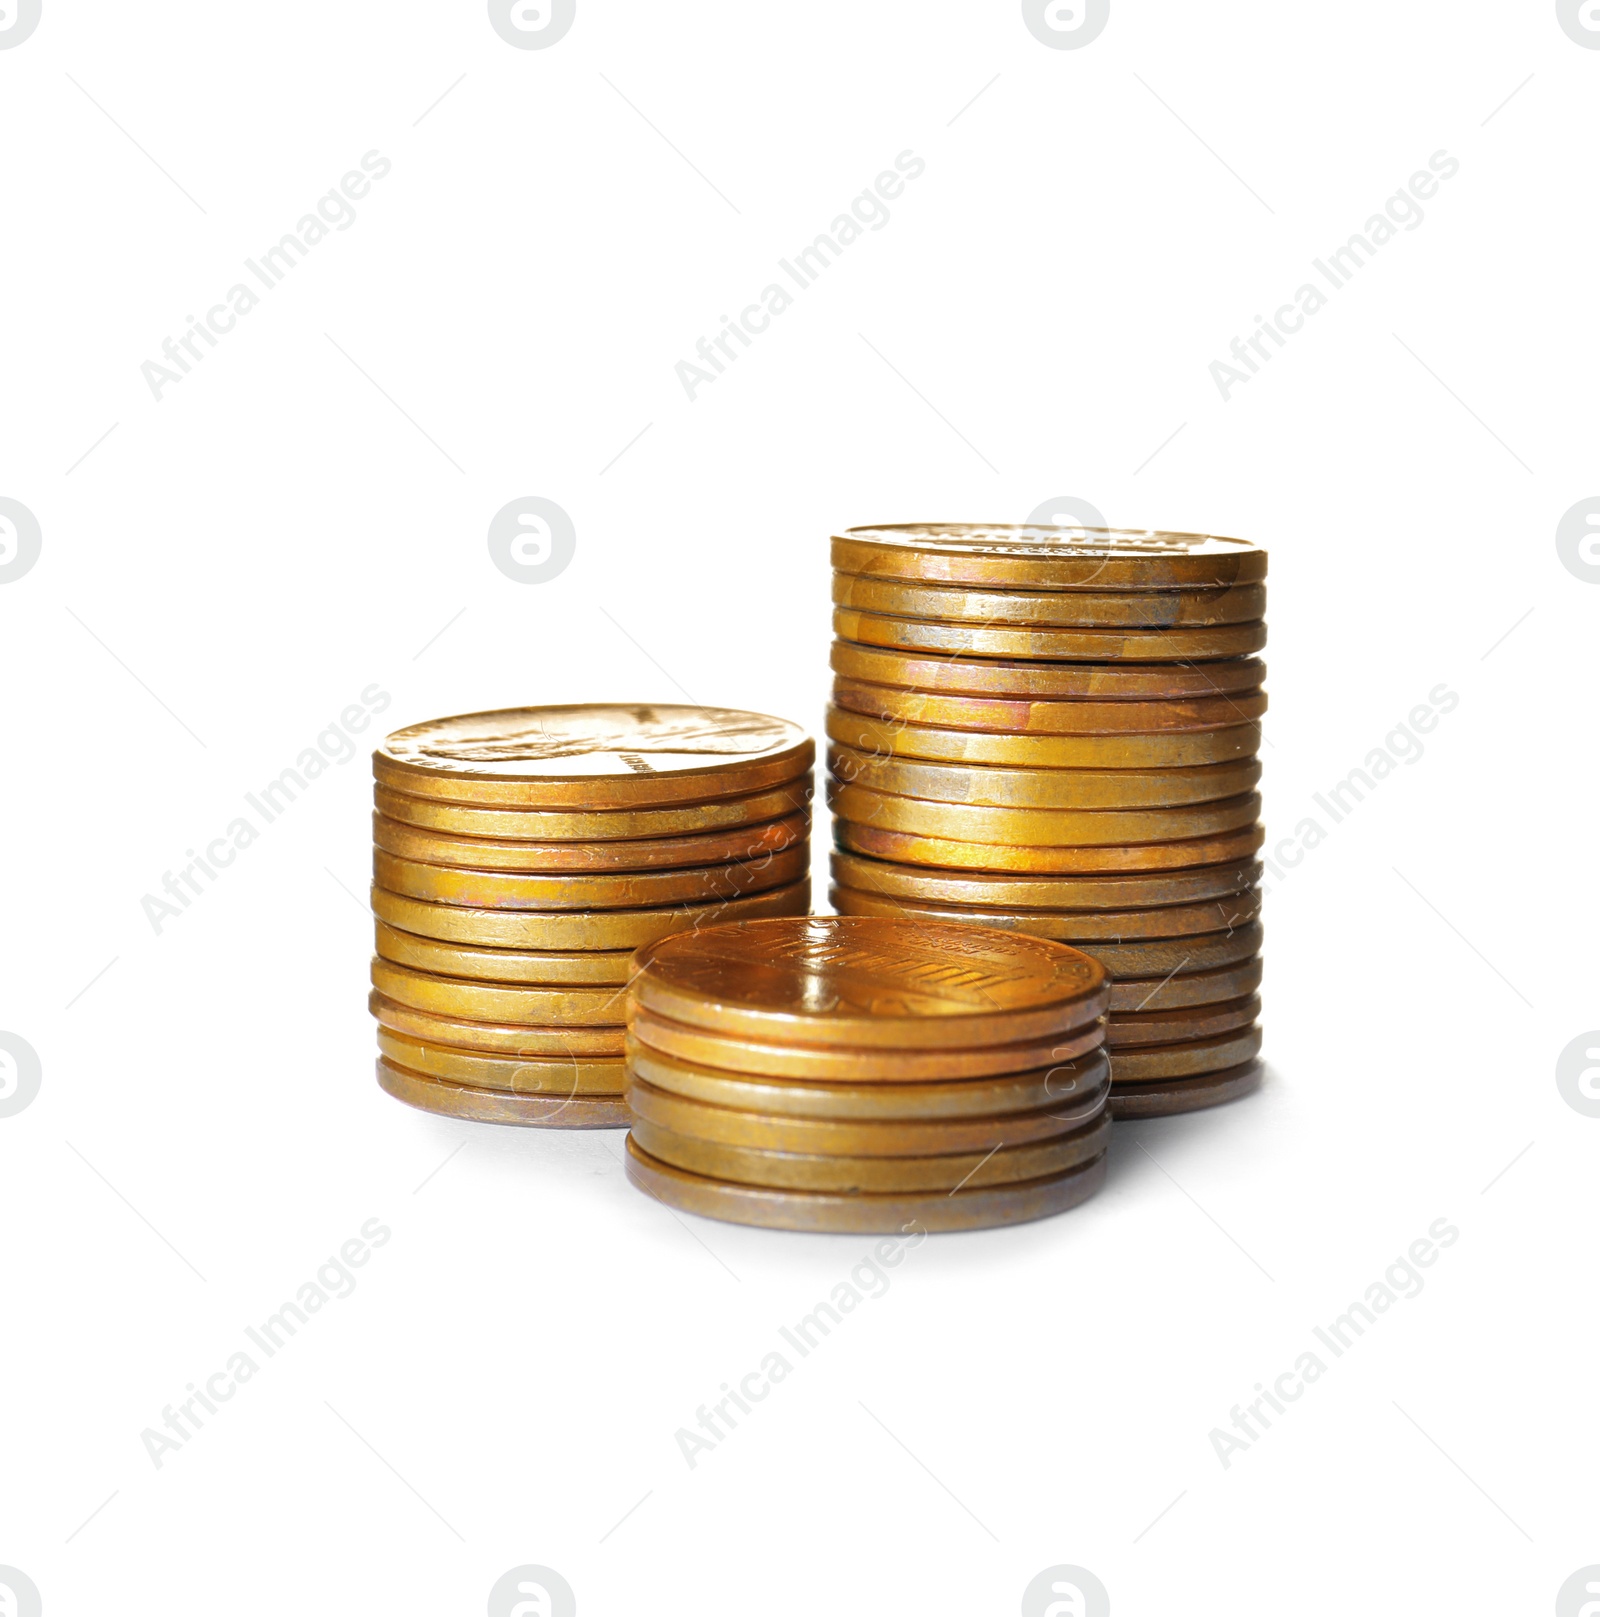 Photo of Stacks of US coins isolated on white